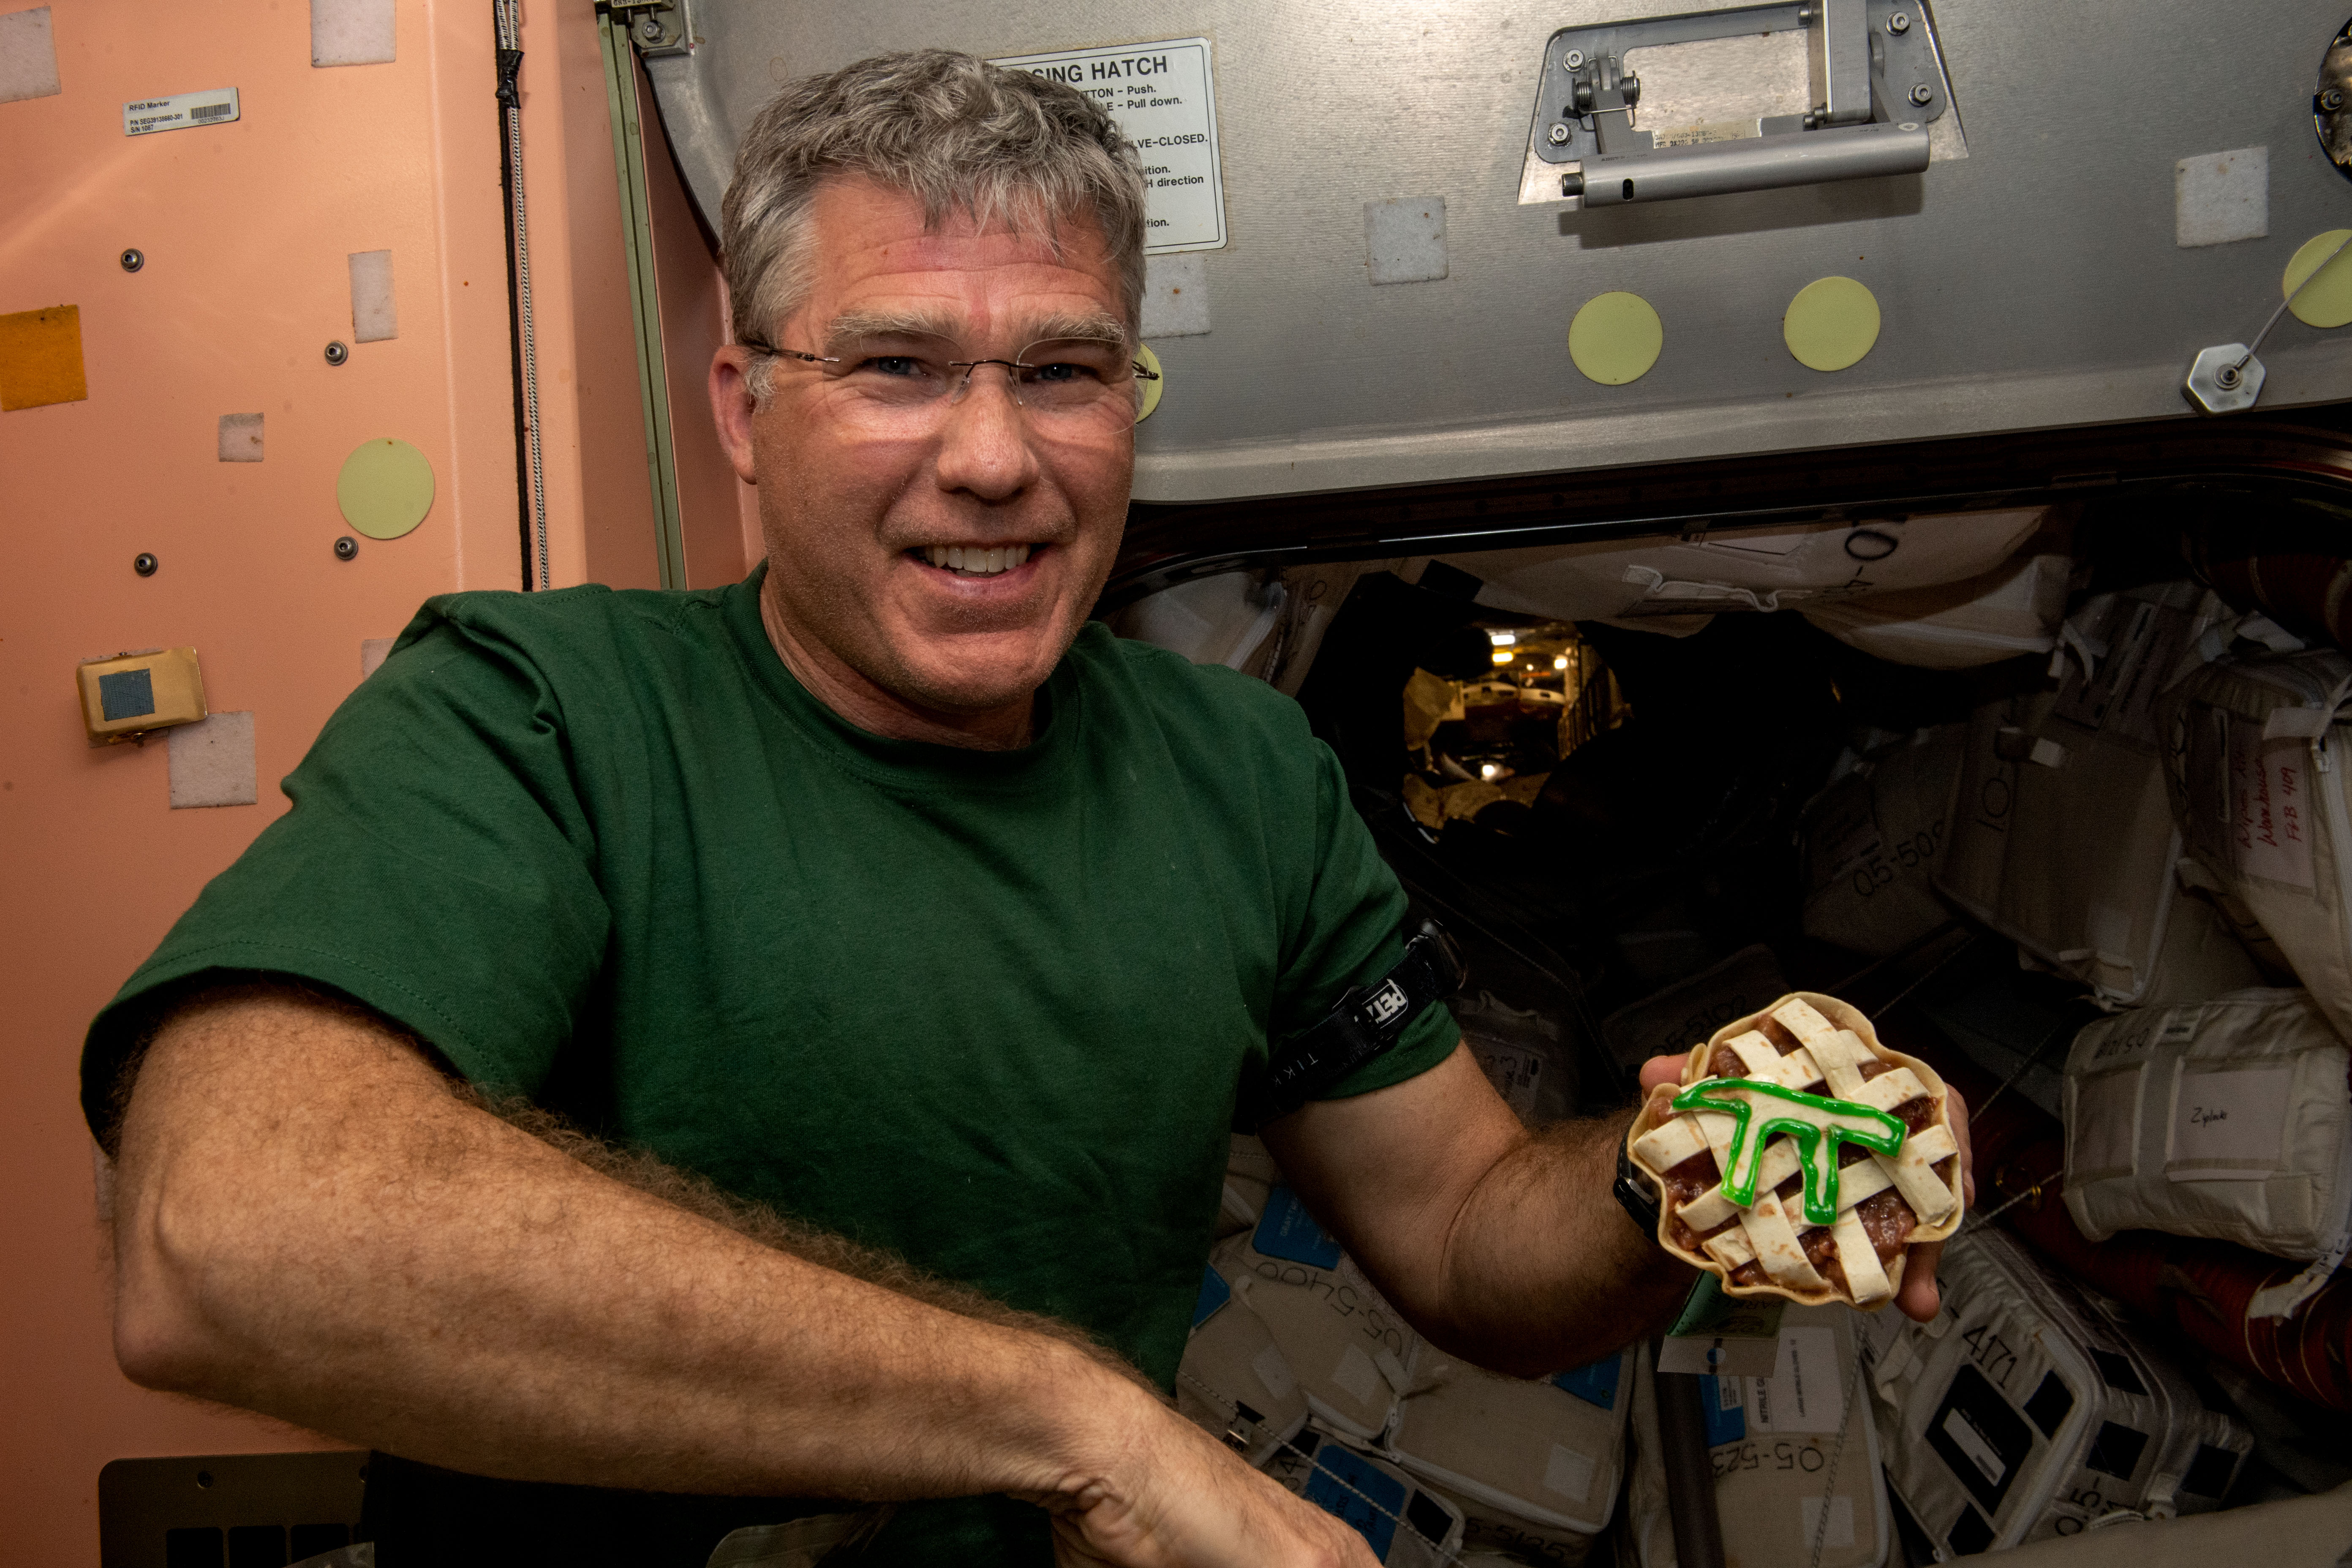 Stephen Bowen, wearing a green t-shirt and glasses, poses with a small latticed pie with a pi symbol outlined in green atop the lattice. Part of the International Space Station is visible behind him.